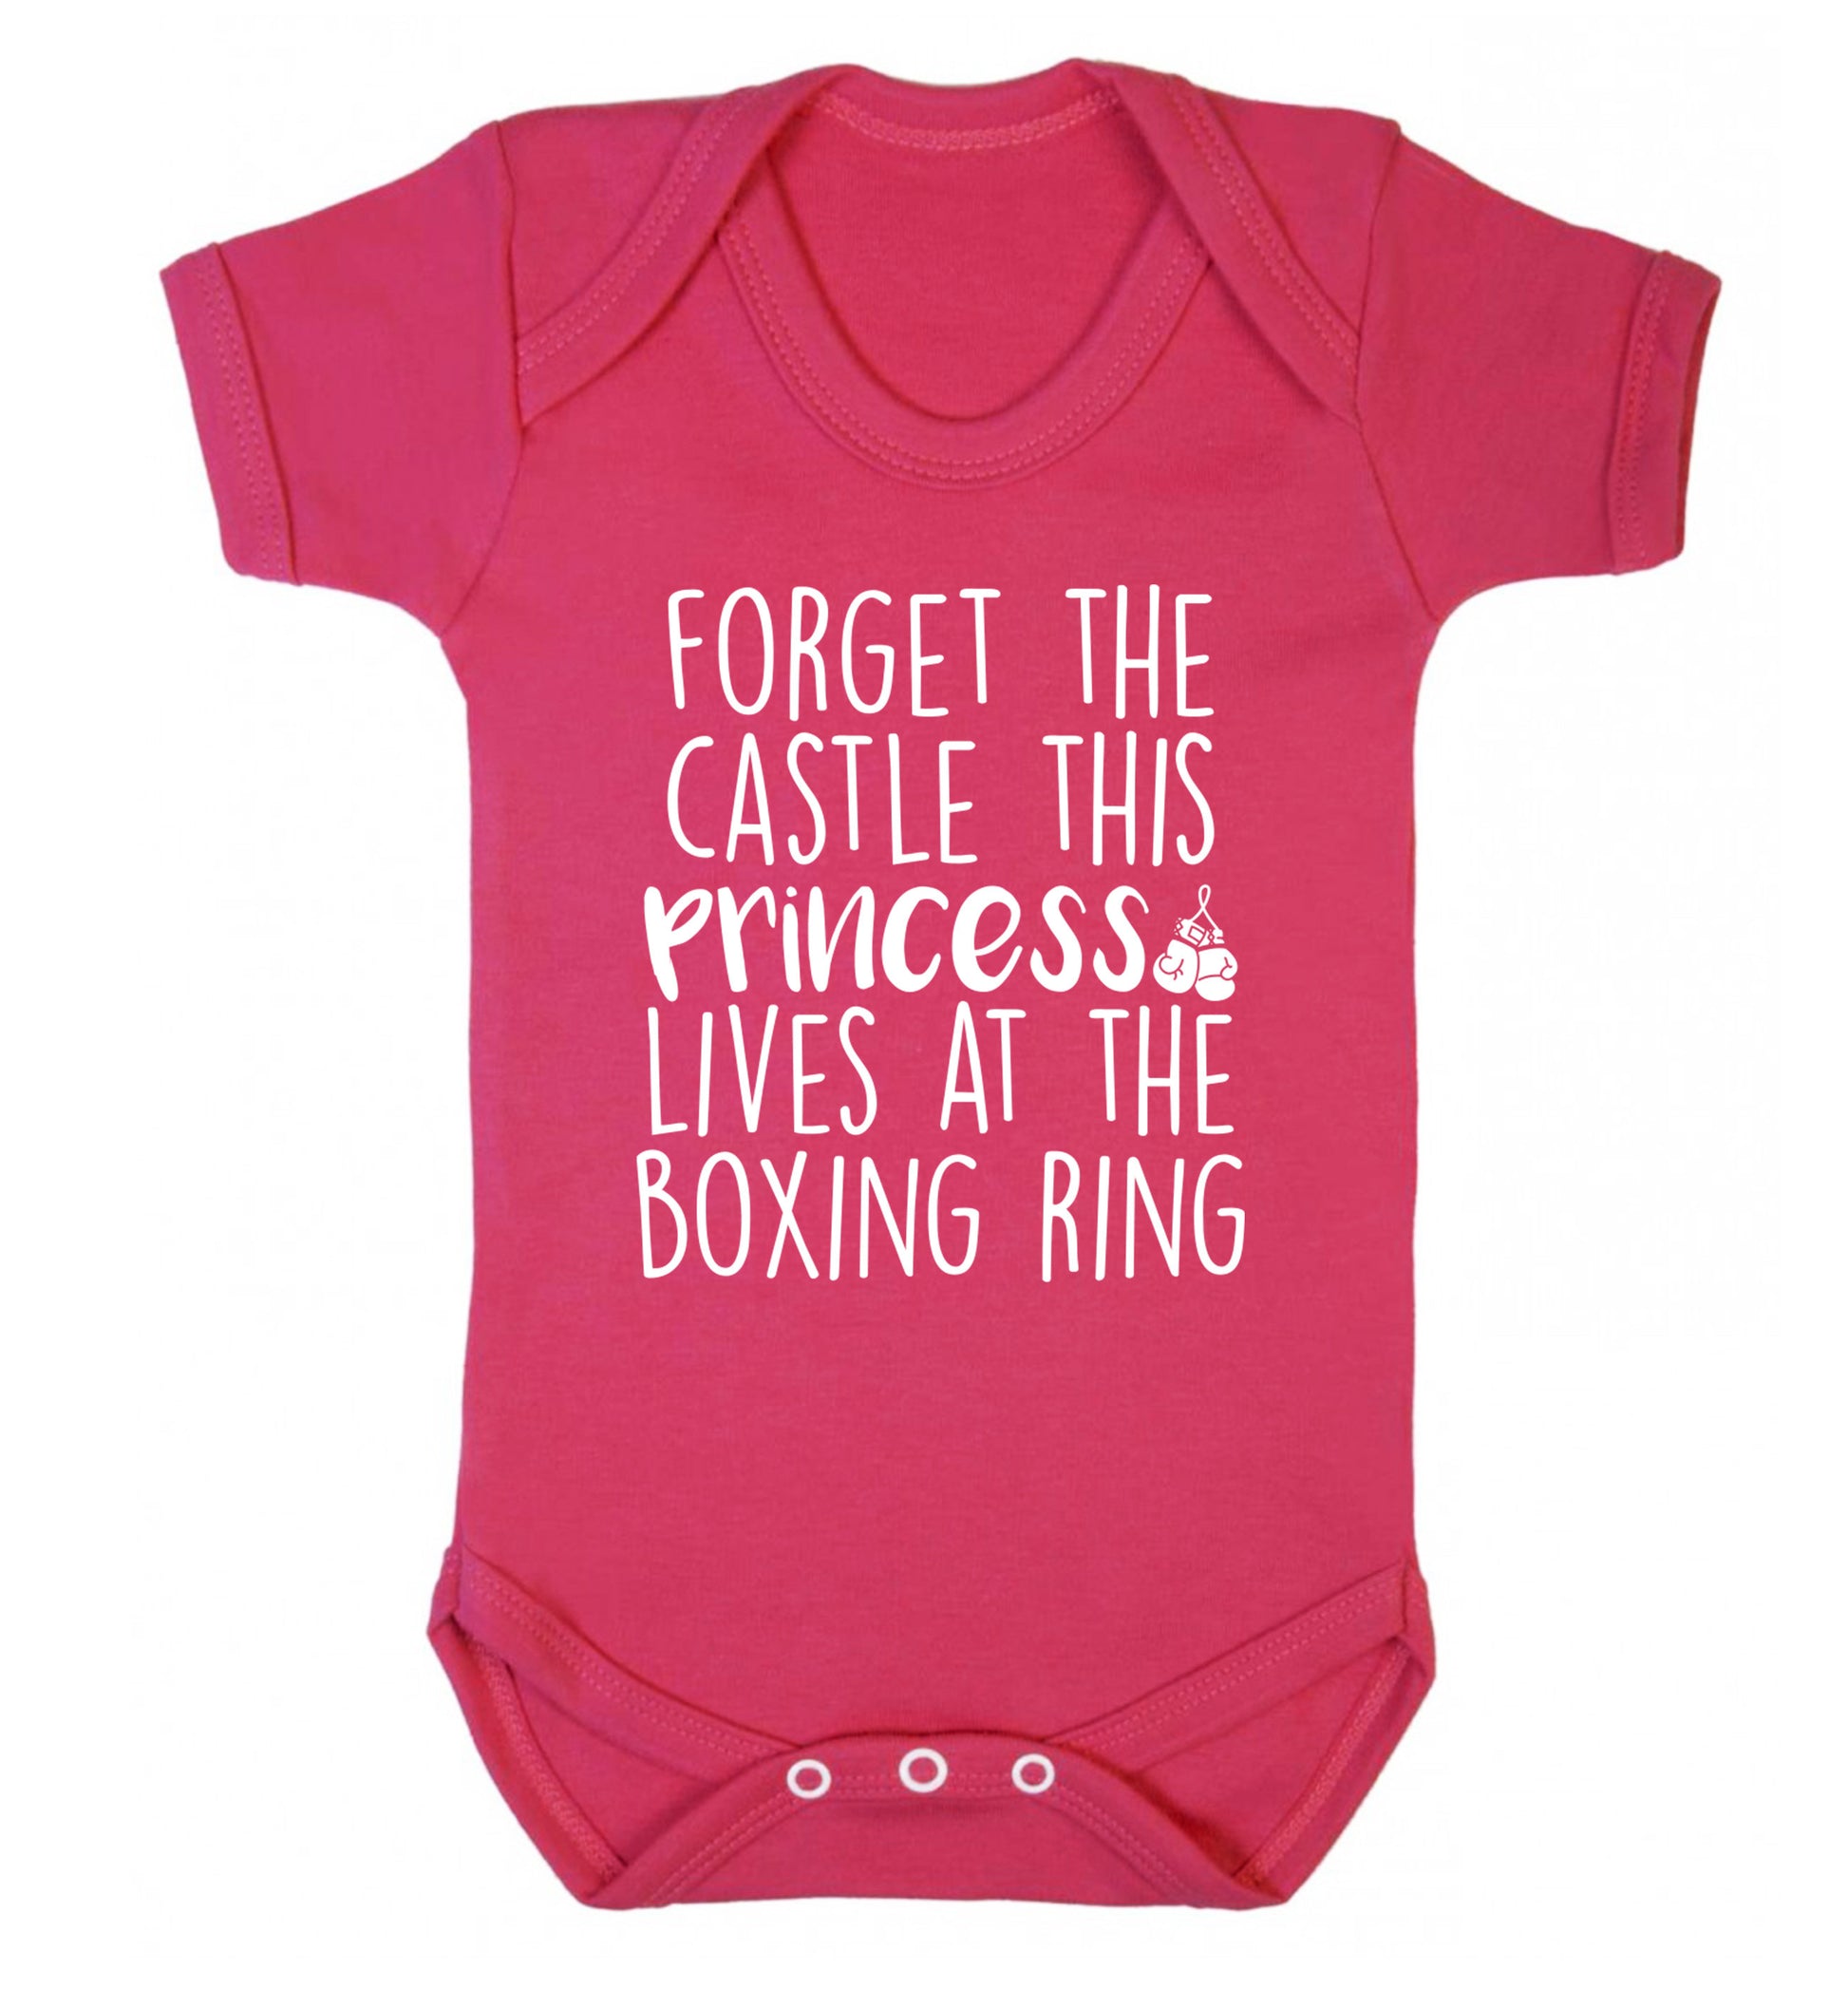 Forget the castle this princess lives at the boxing ring Baby Vest dark pink 18-24 months